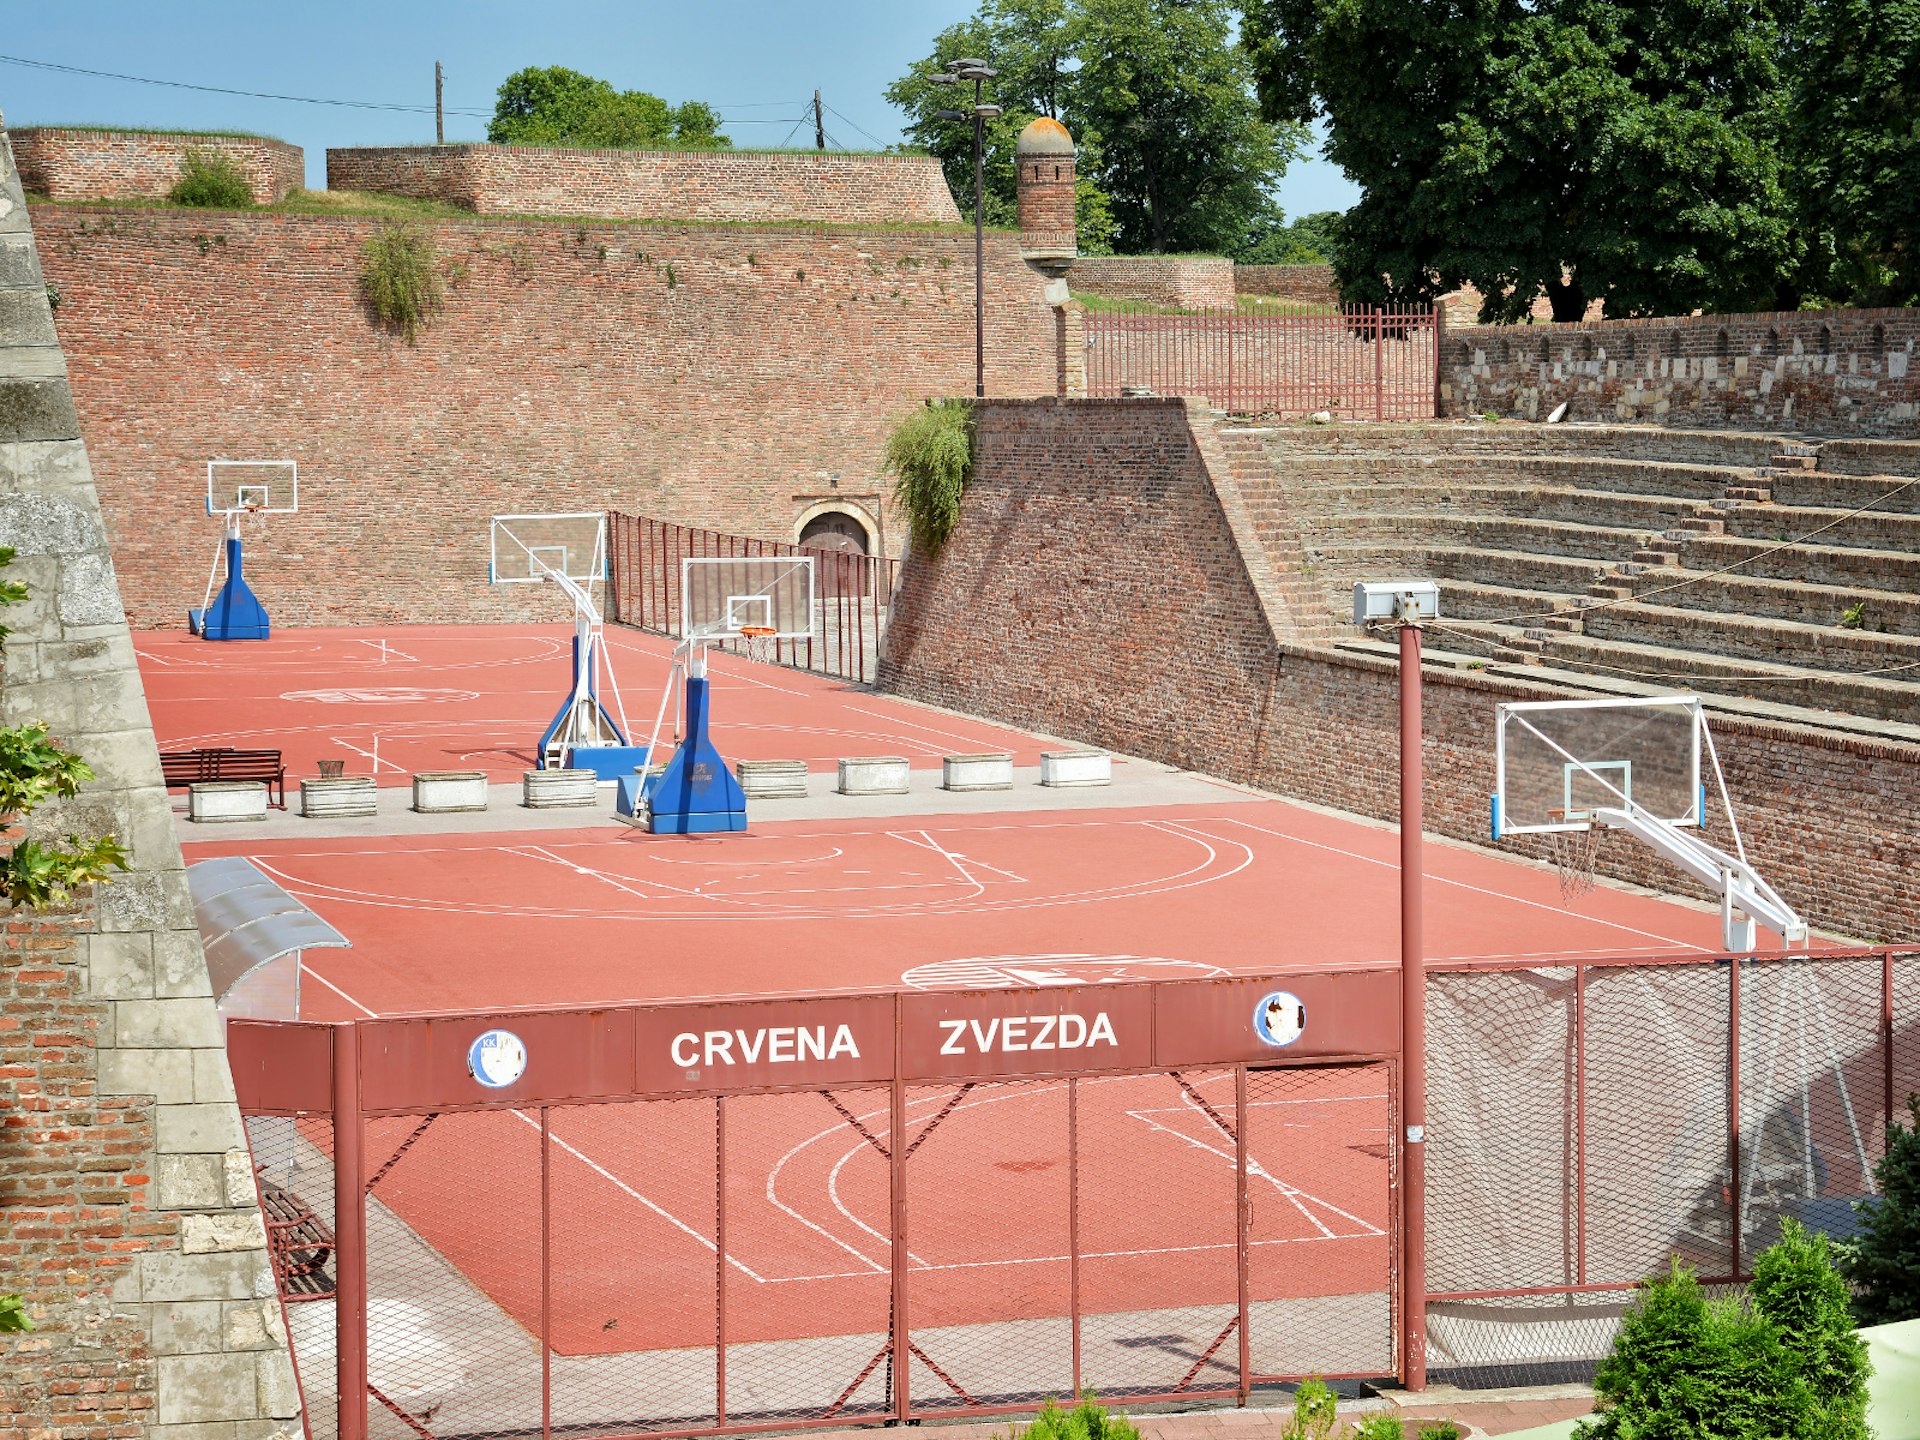 The Red Star club's basketball court within the grounds of the Kalemegdan Fortress in Belgrade